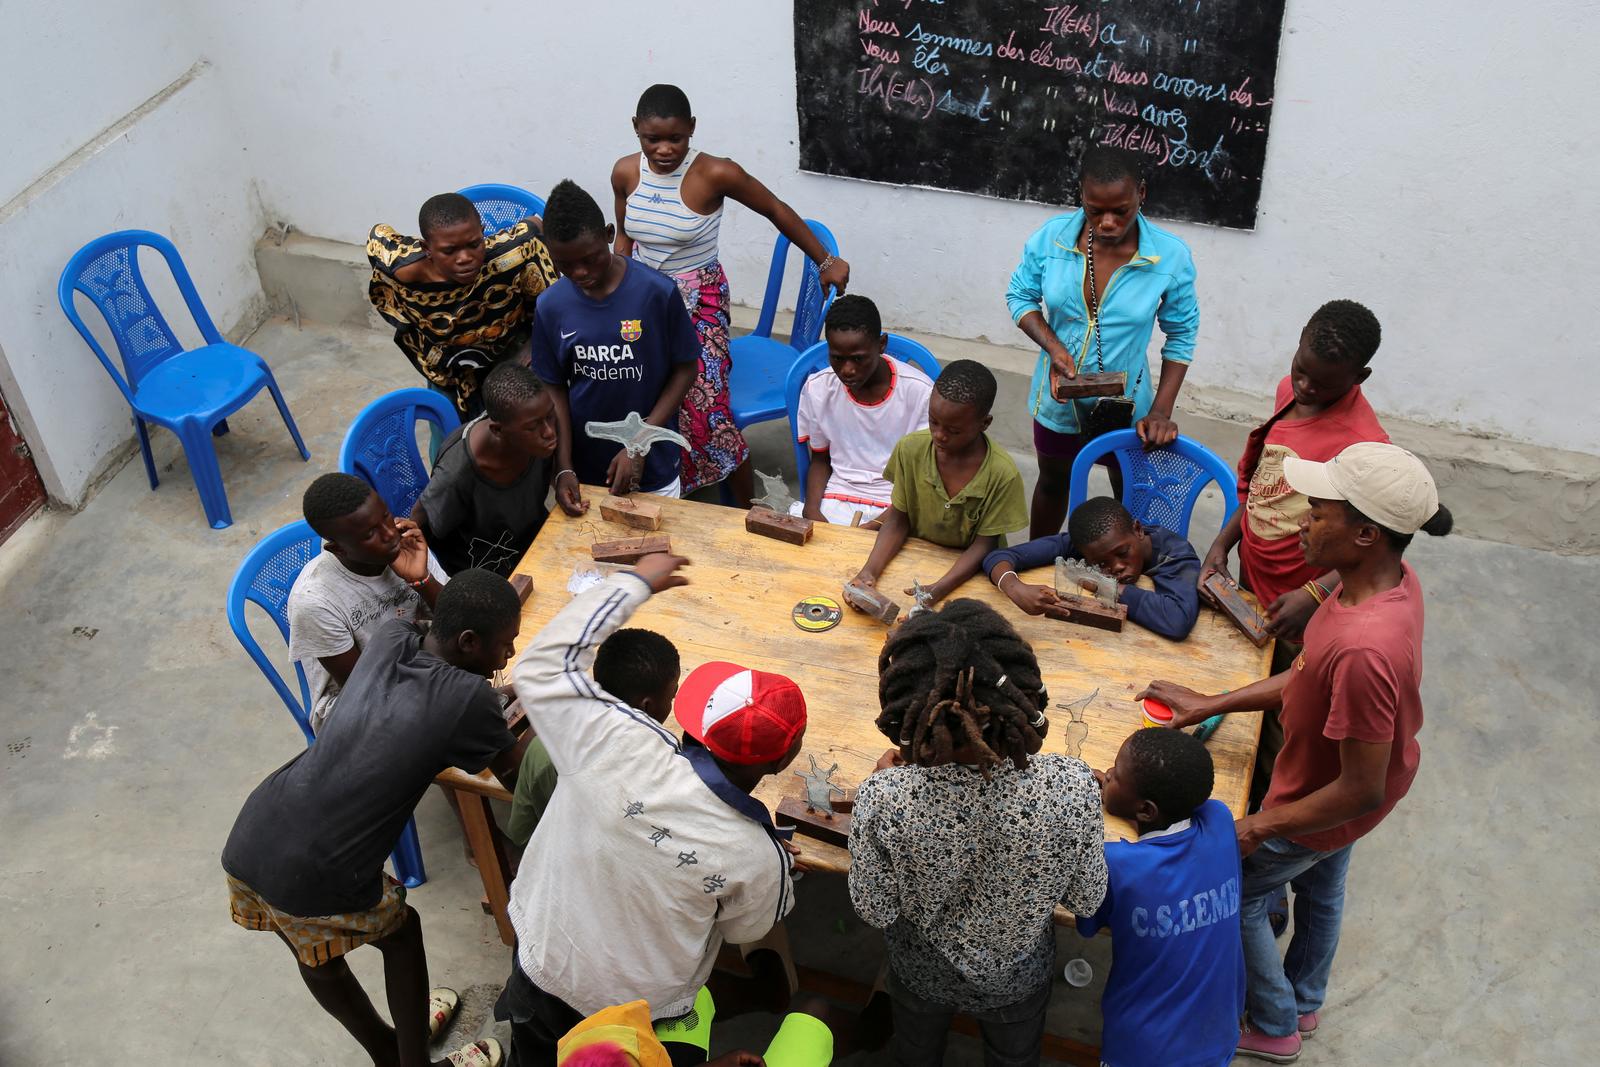 Homeless teenagers take part in a workshop at Mokili Na Poche cultural centre, a Congolese arts refuge that helps street children, in Kinshasa, Democratic Republic of Congo September 5, 2023. REUTERS/Justin Makangara Photo: JUSTIN MAKANGARA/REUTERS